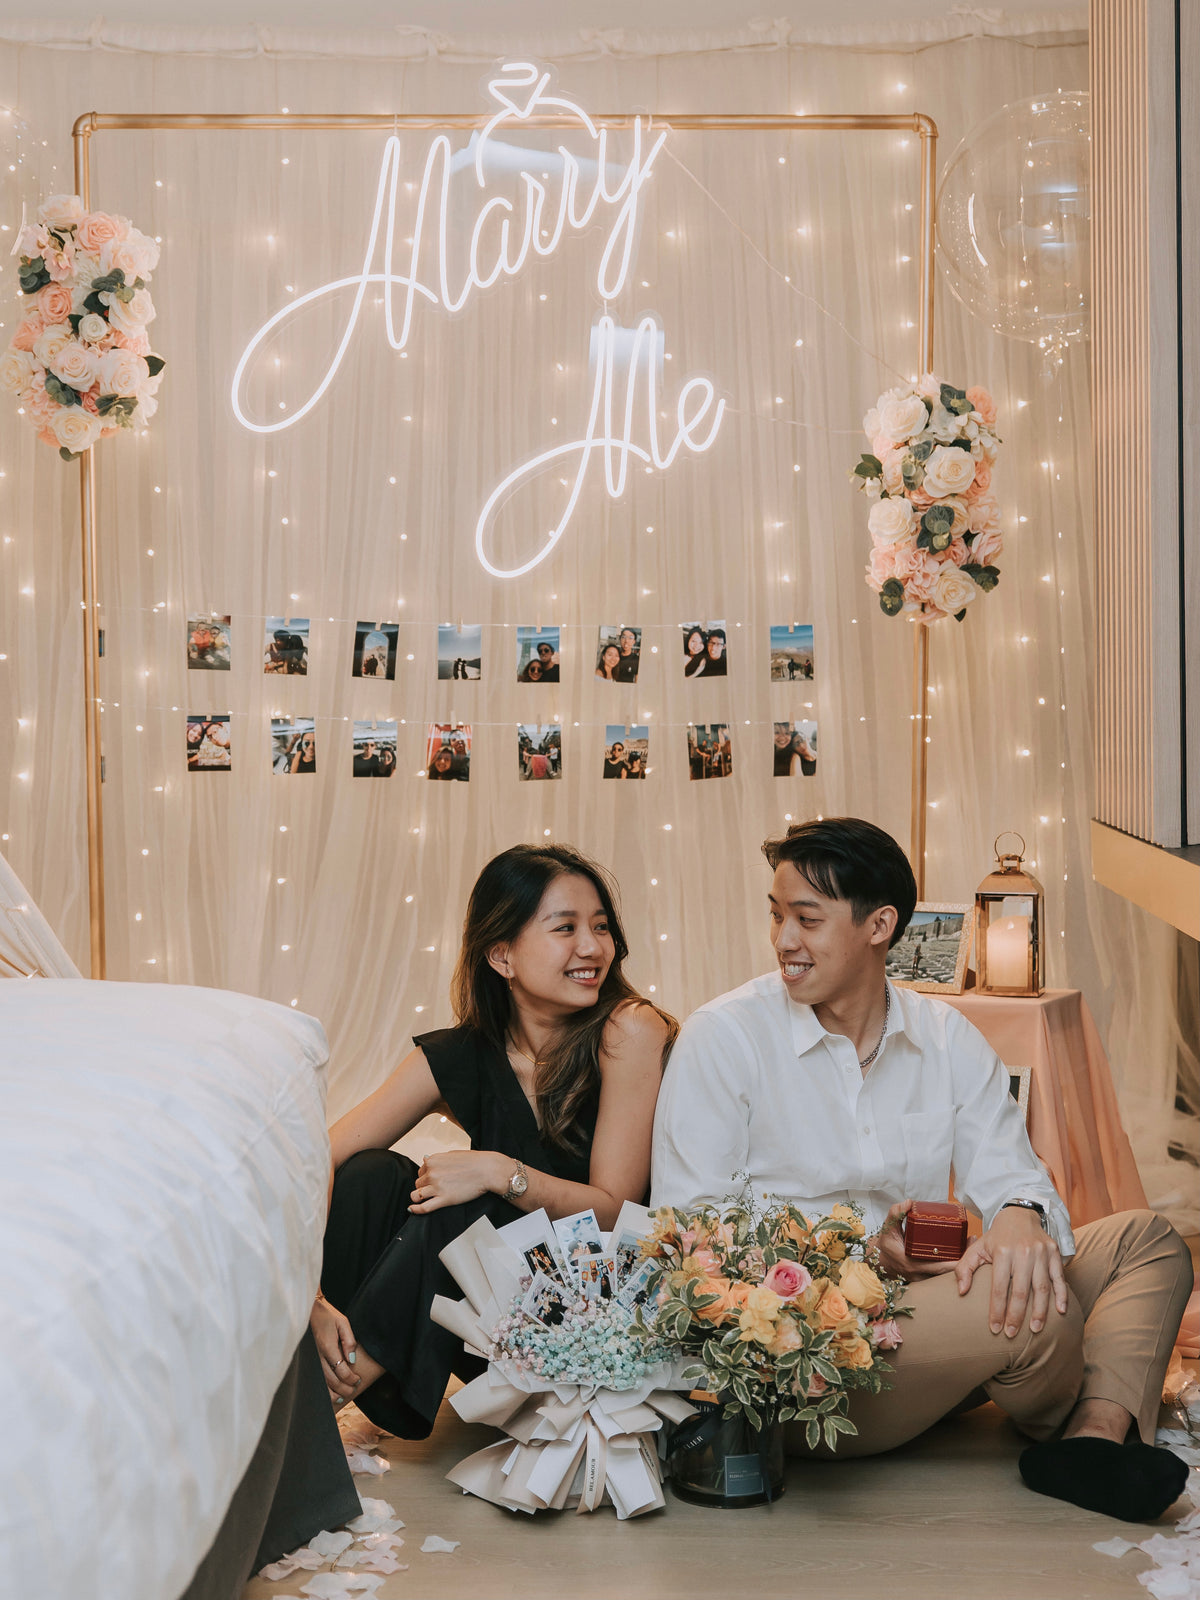 Romantic Hotel Room Proposal Decor in ParkRoyal Collection Marina Bay Singapore with Fairylight Backdrop, Pastel Balloons and Flowers by Style It Simply